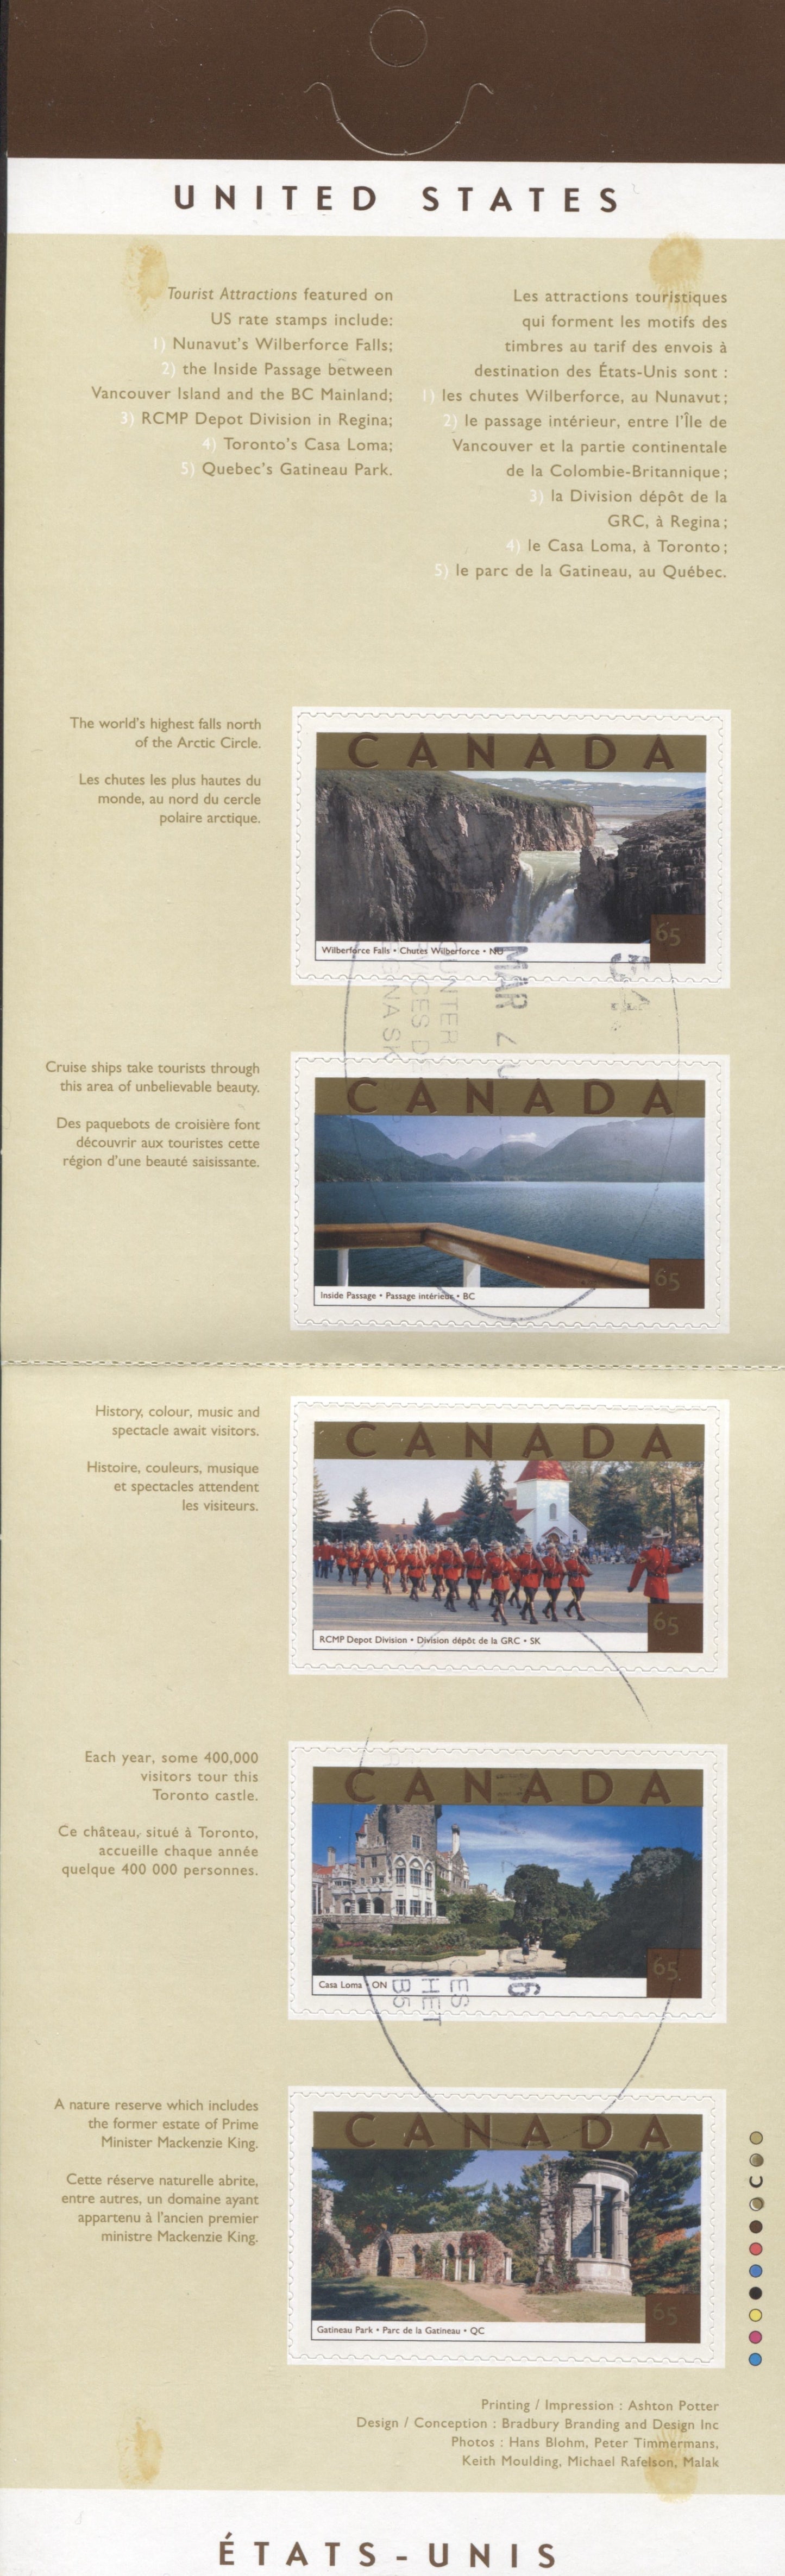 Canada #BK270a-b 2003 Tourist Attractions Issue, Complete $3.25 Booklet, Tullis Russell Coatings Paper, Dead Paper, 4 mm GT-4 Tagging